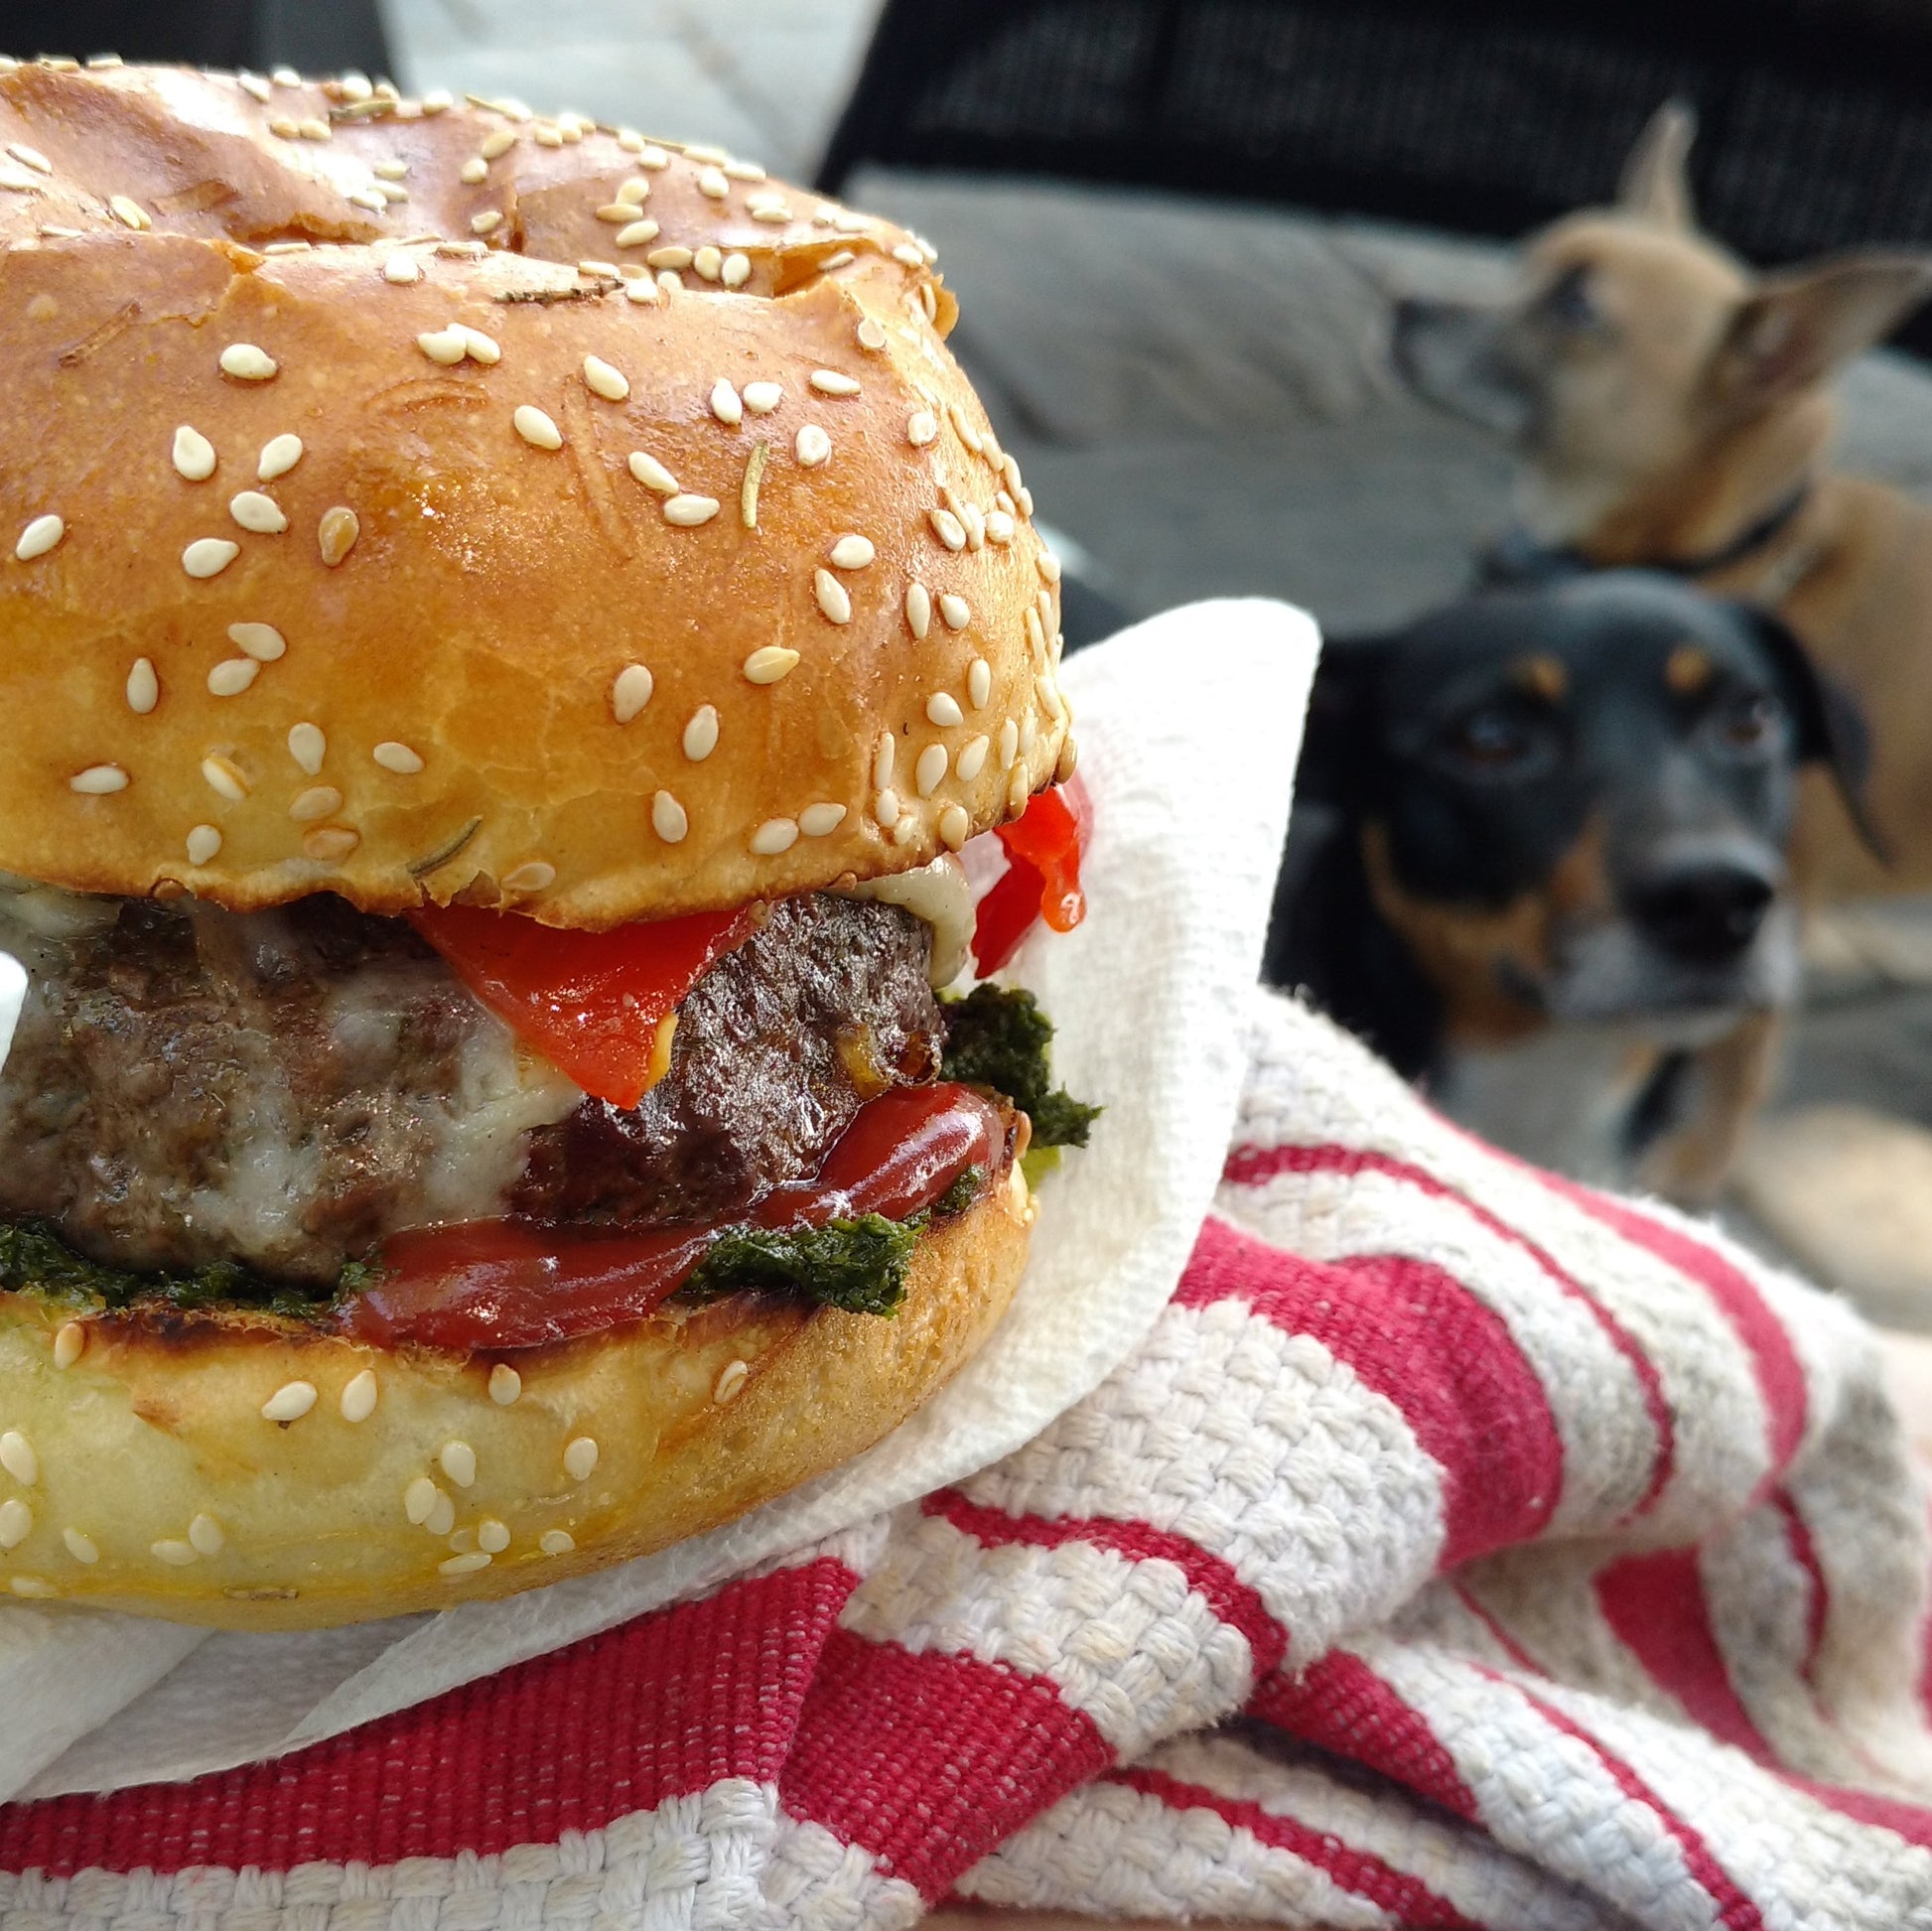 partial shot of burger on a sesame bun with ketchup, cheese & red pepper on a papertowel and red & white stripped dish towel,  with a jack russell slightly out of focus looking on 